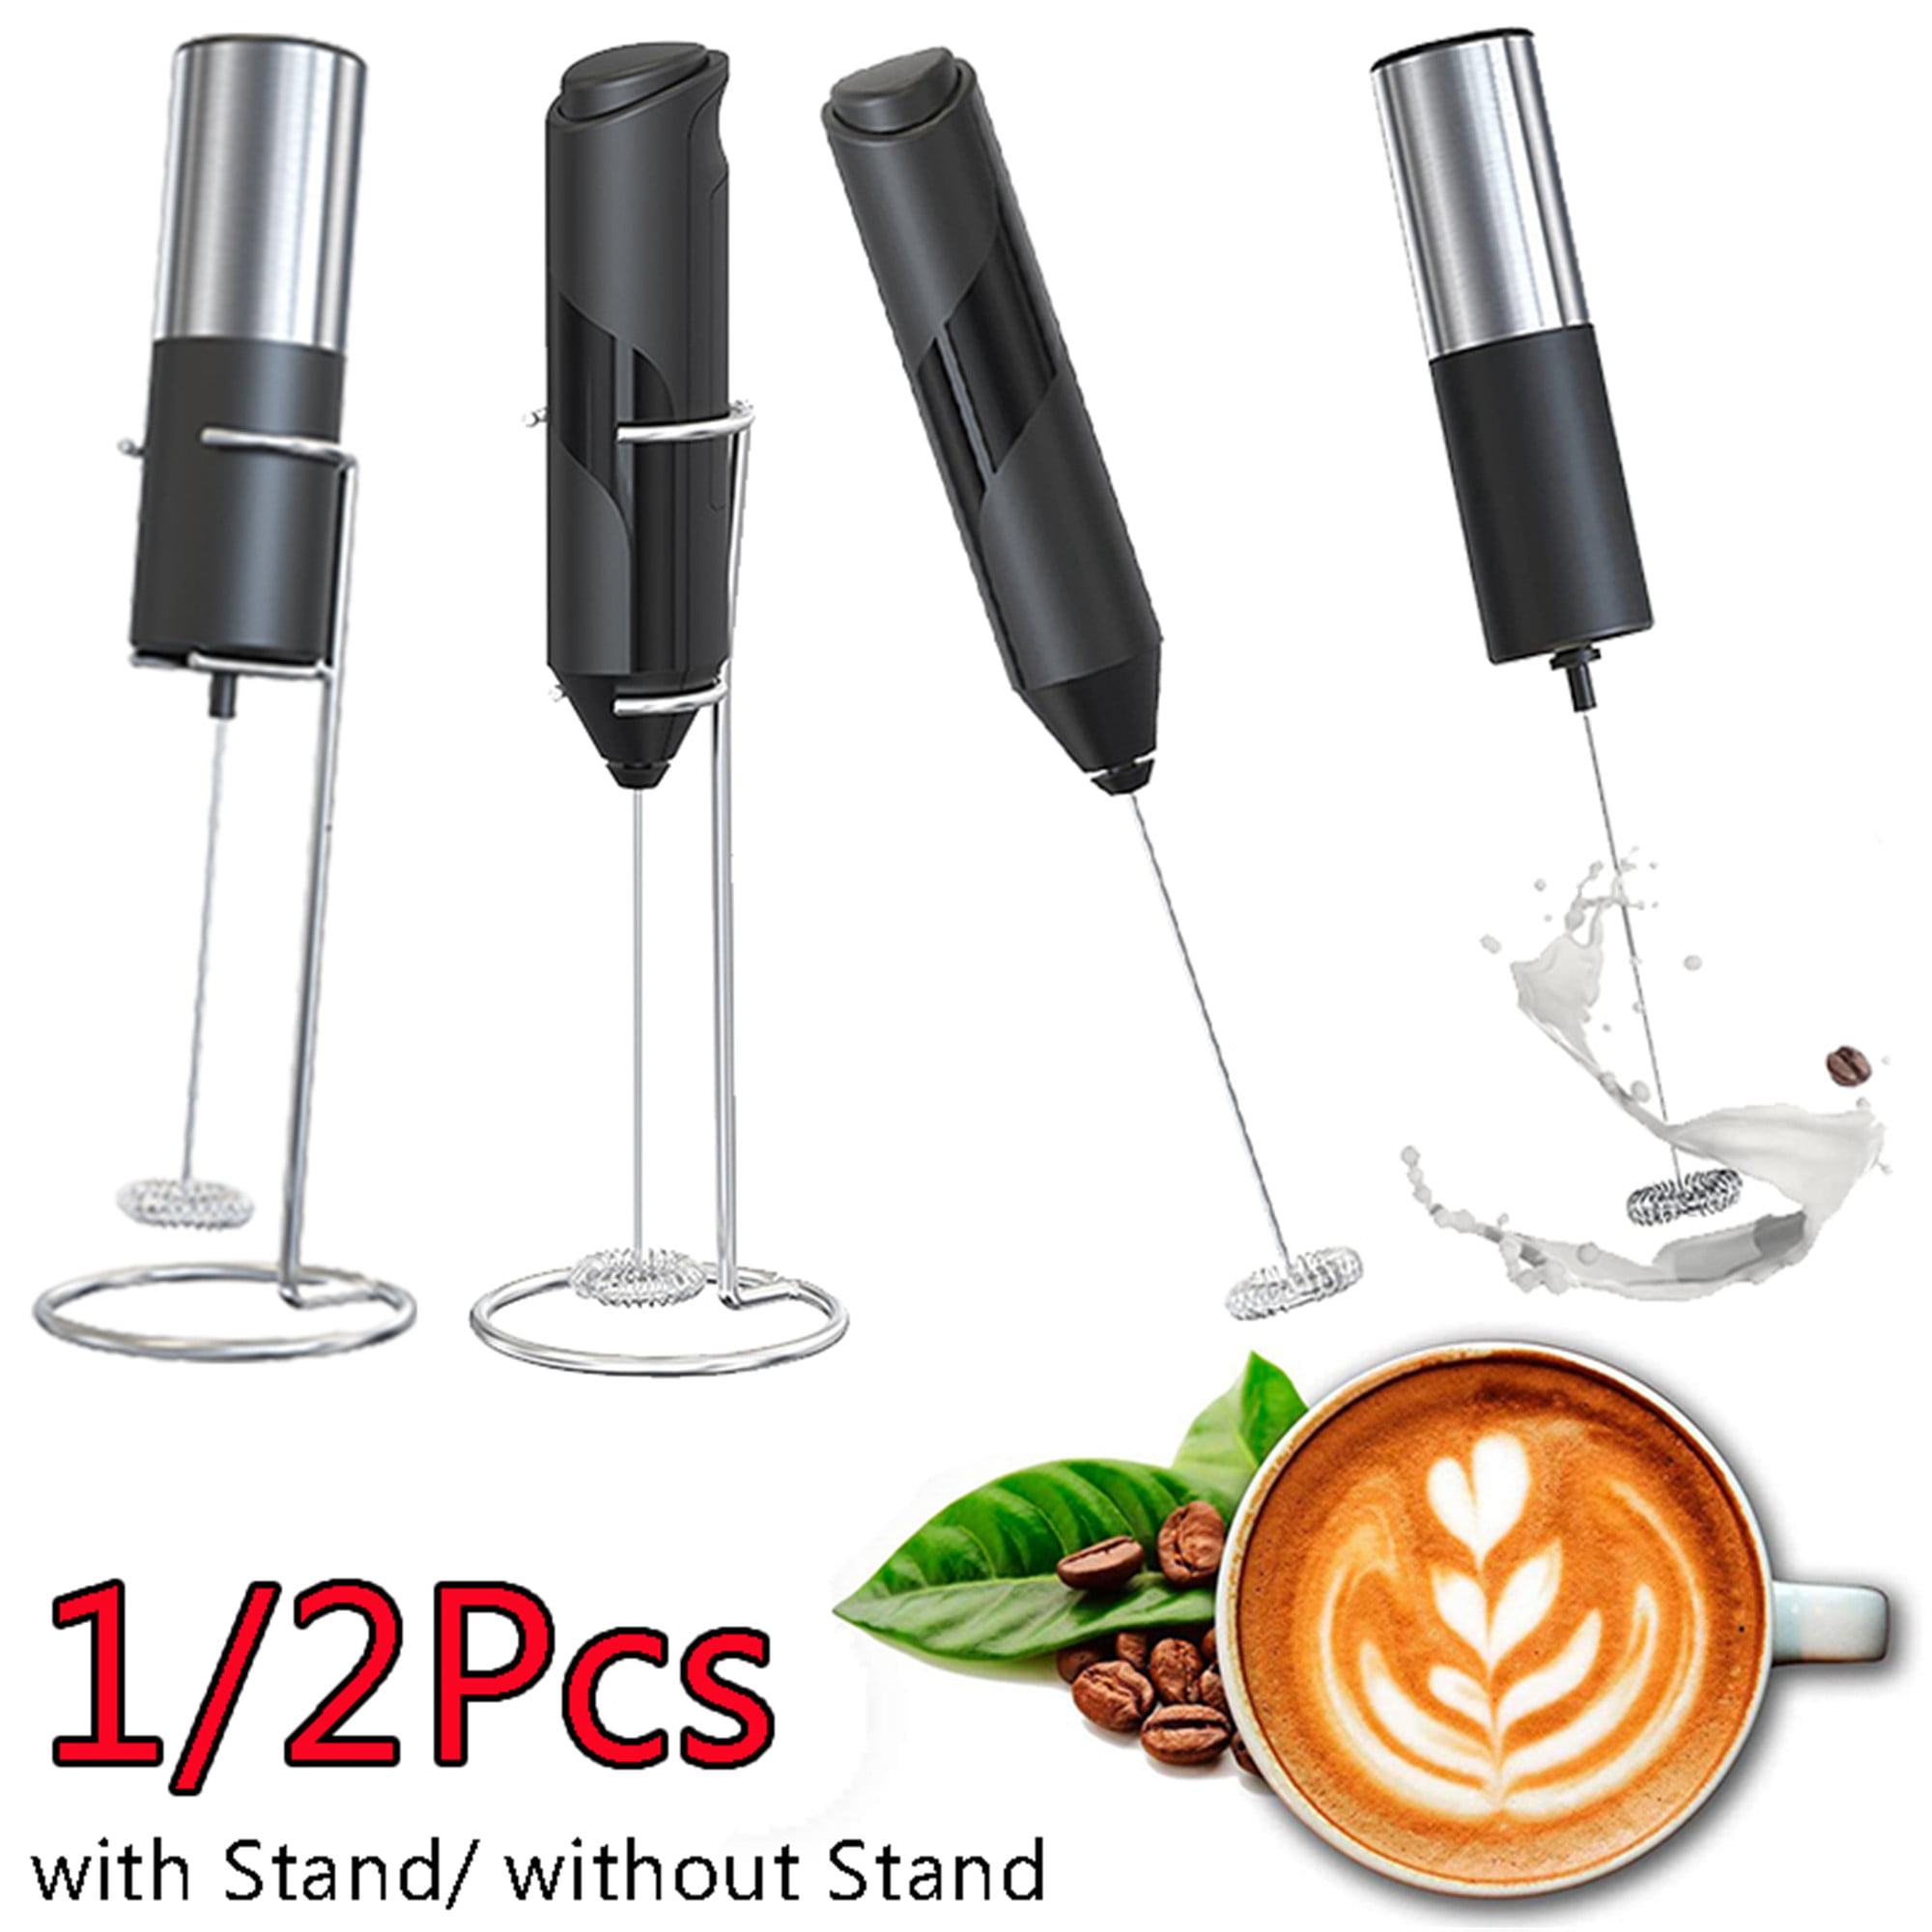 1pc Rechargeable Milk Frother With Stand, Includes 3 Whisk Heads